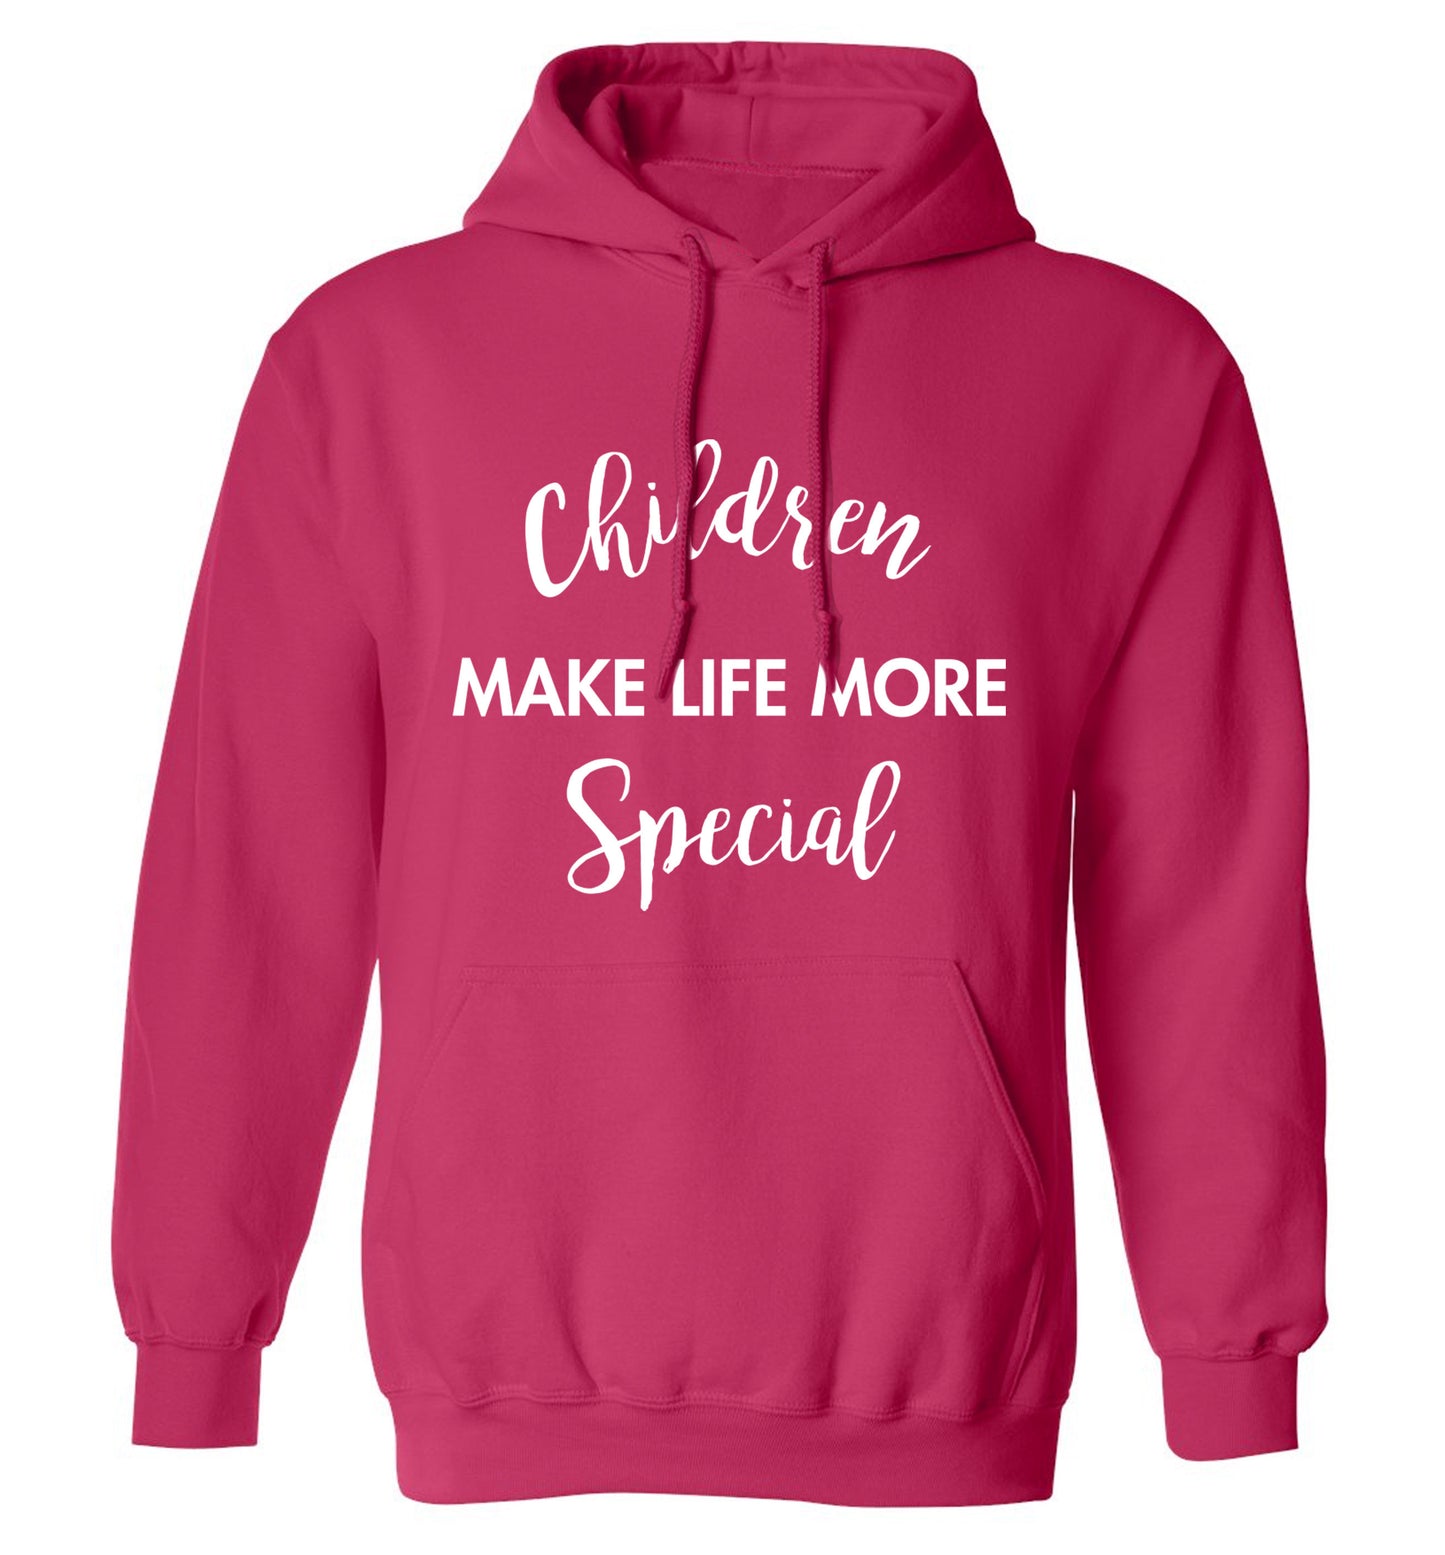 Children make life more special adults unisex pink hoodie 2XL